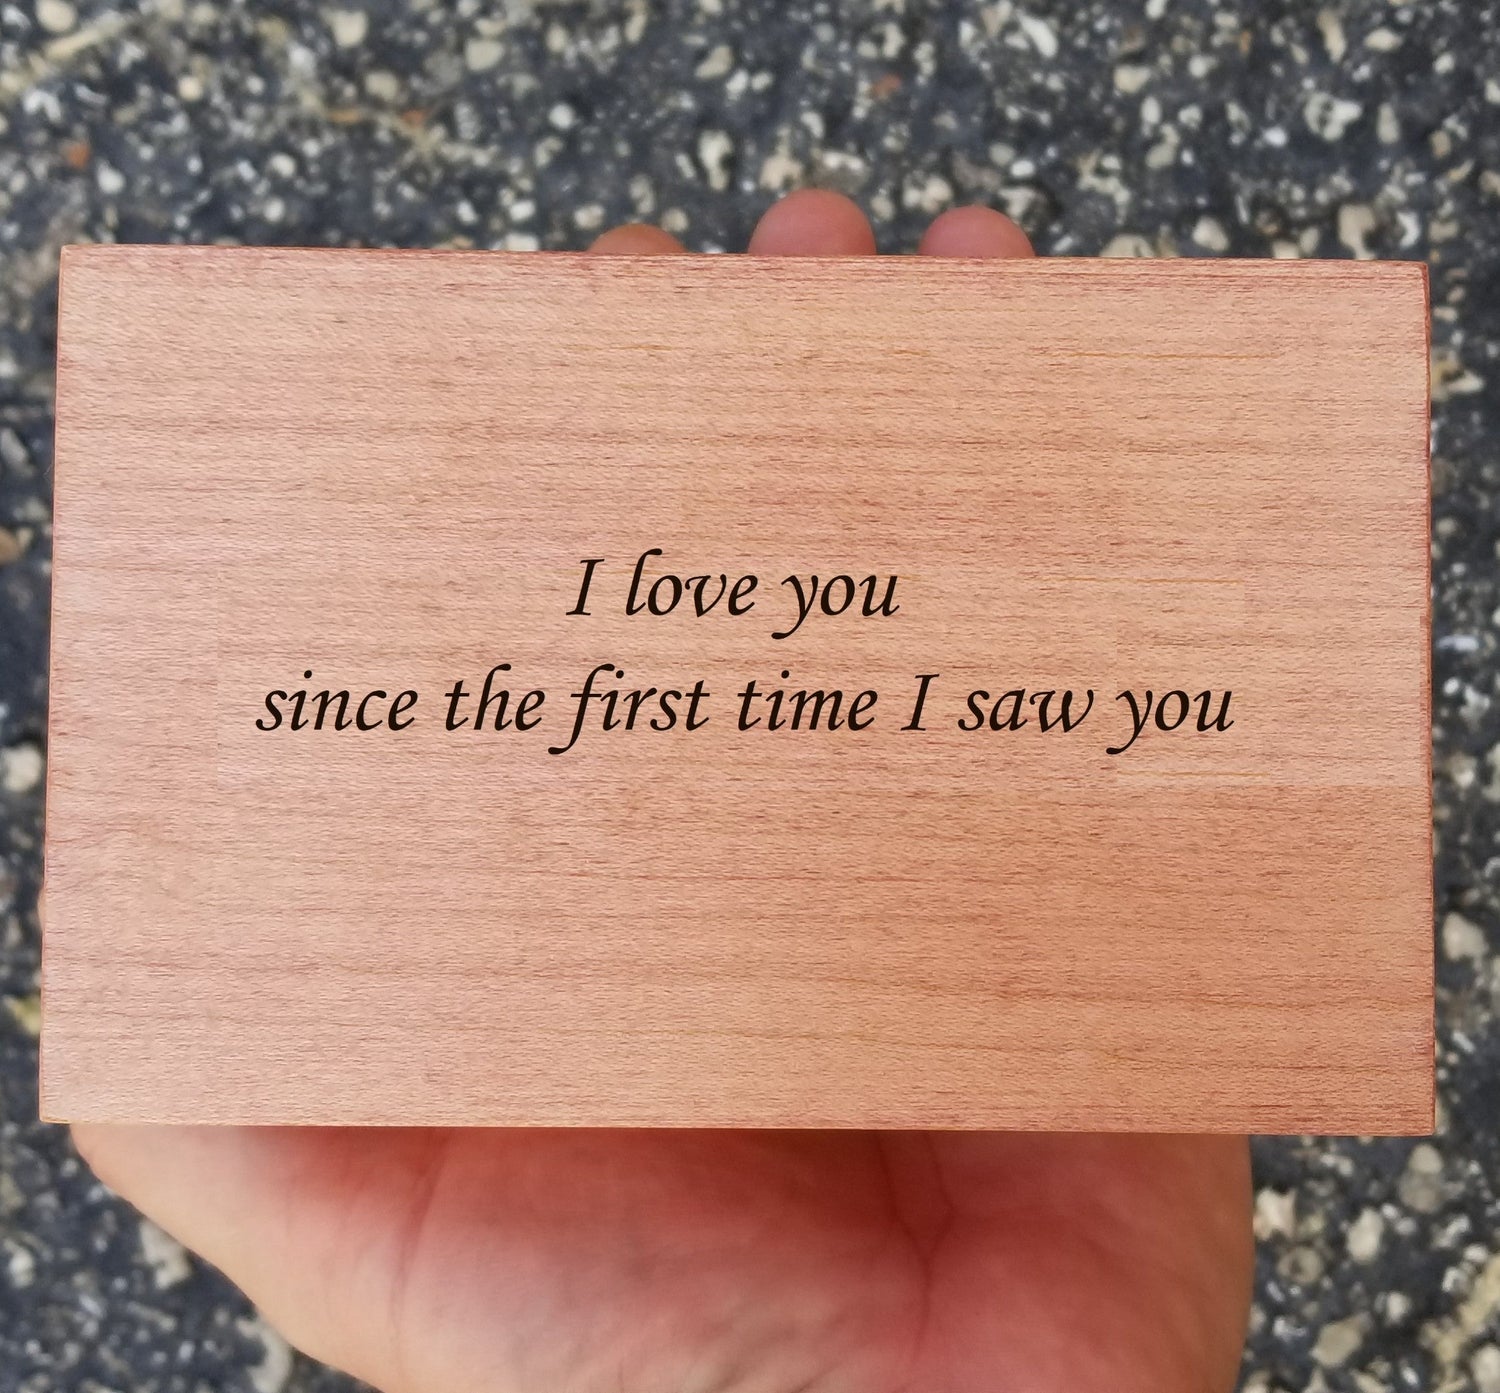 I love you gift idea, jewelry box with personalized engraving on the bottom side of the box